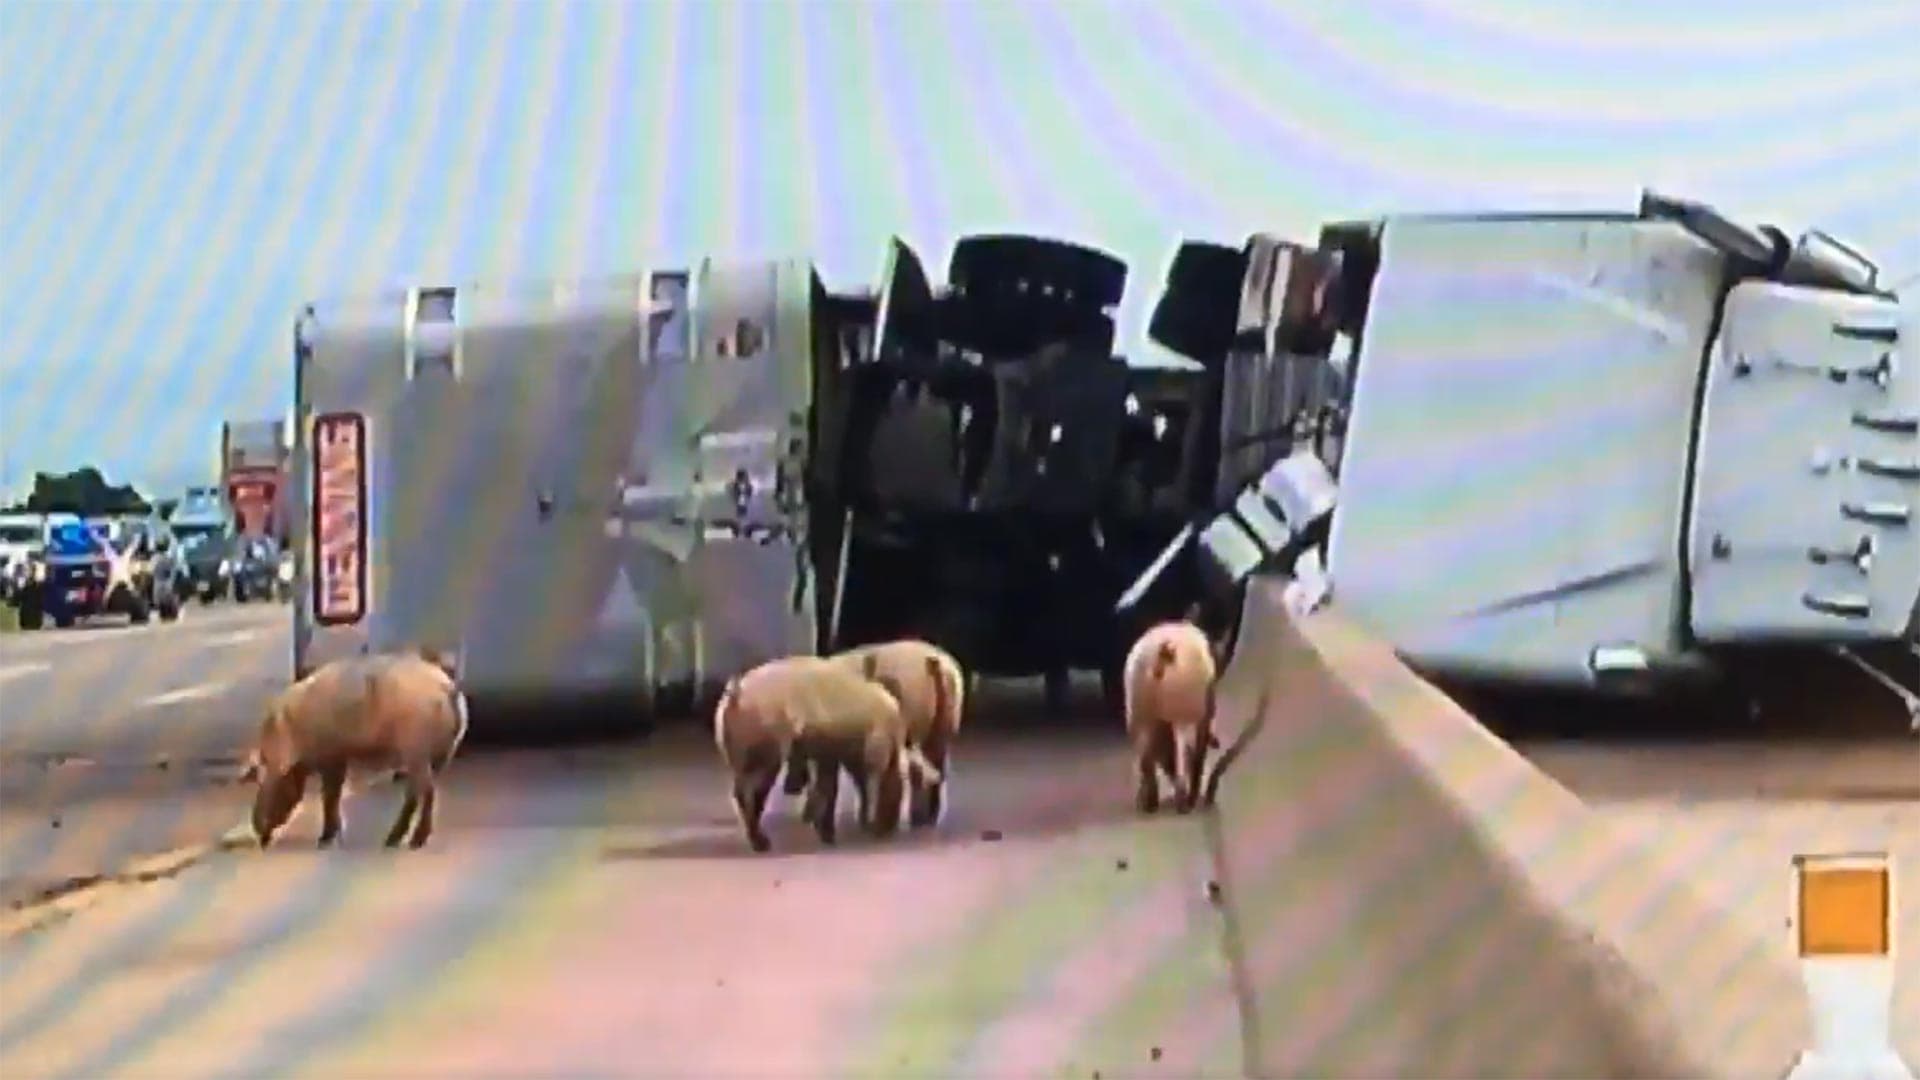 Dozens of Pigs Released Onto Texas Highway After Crash